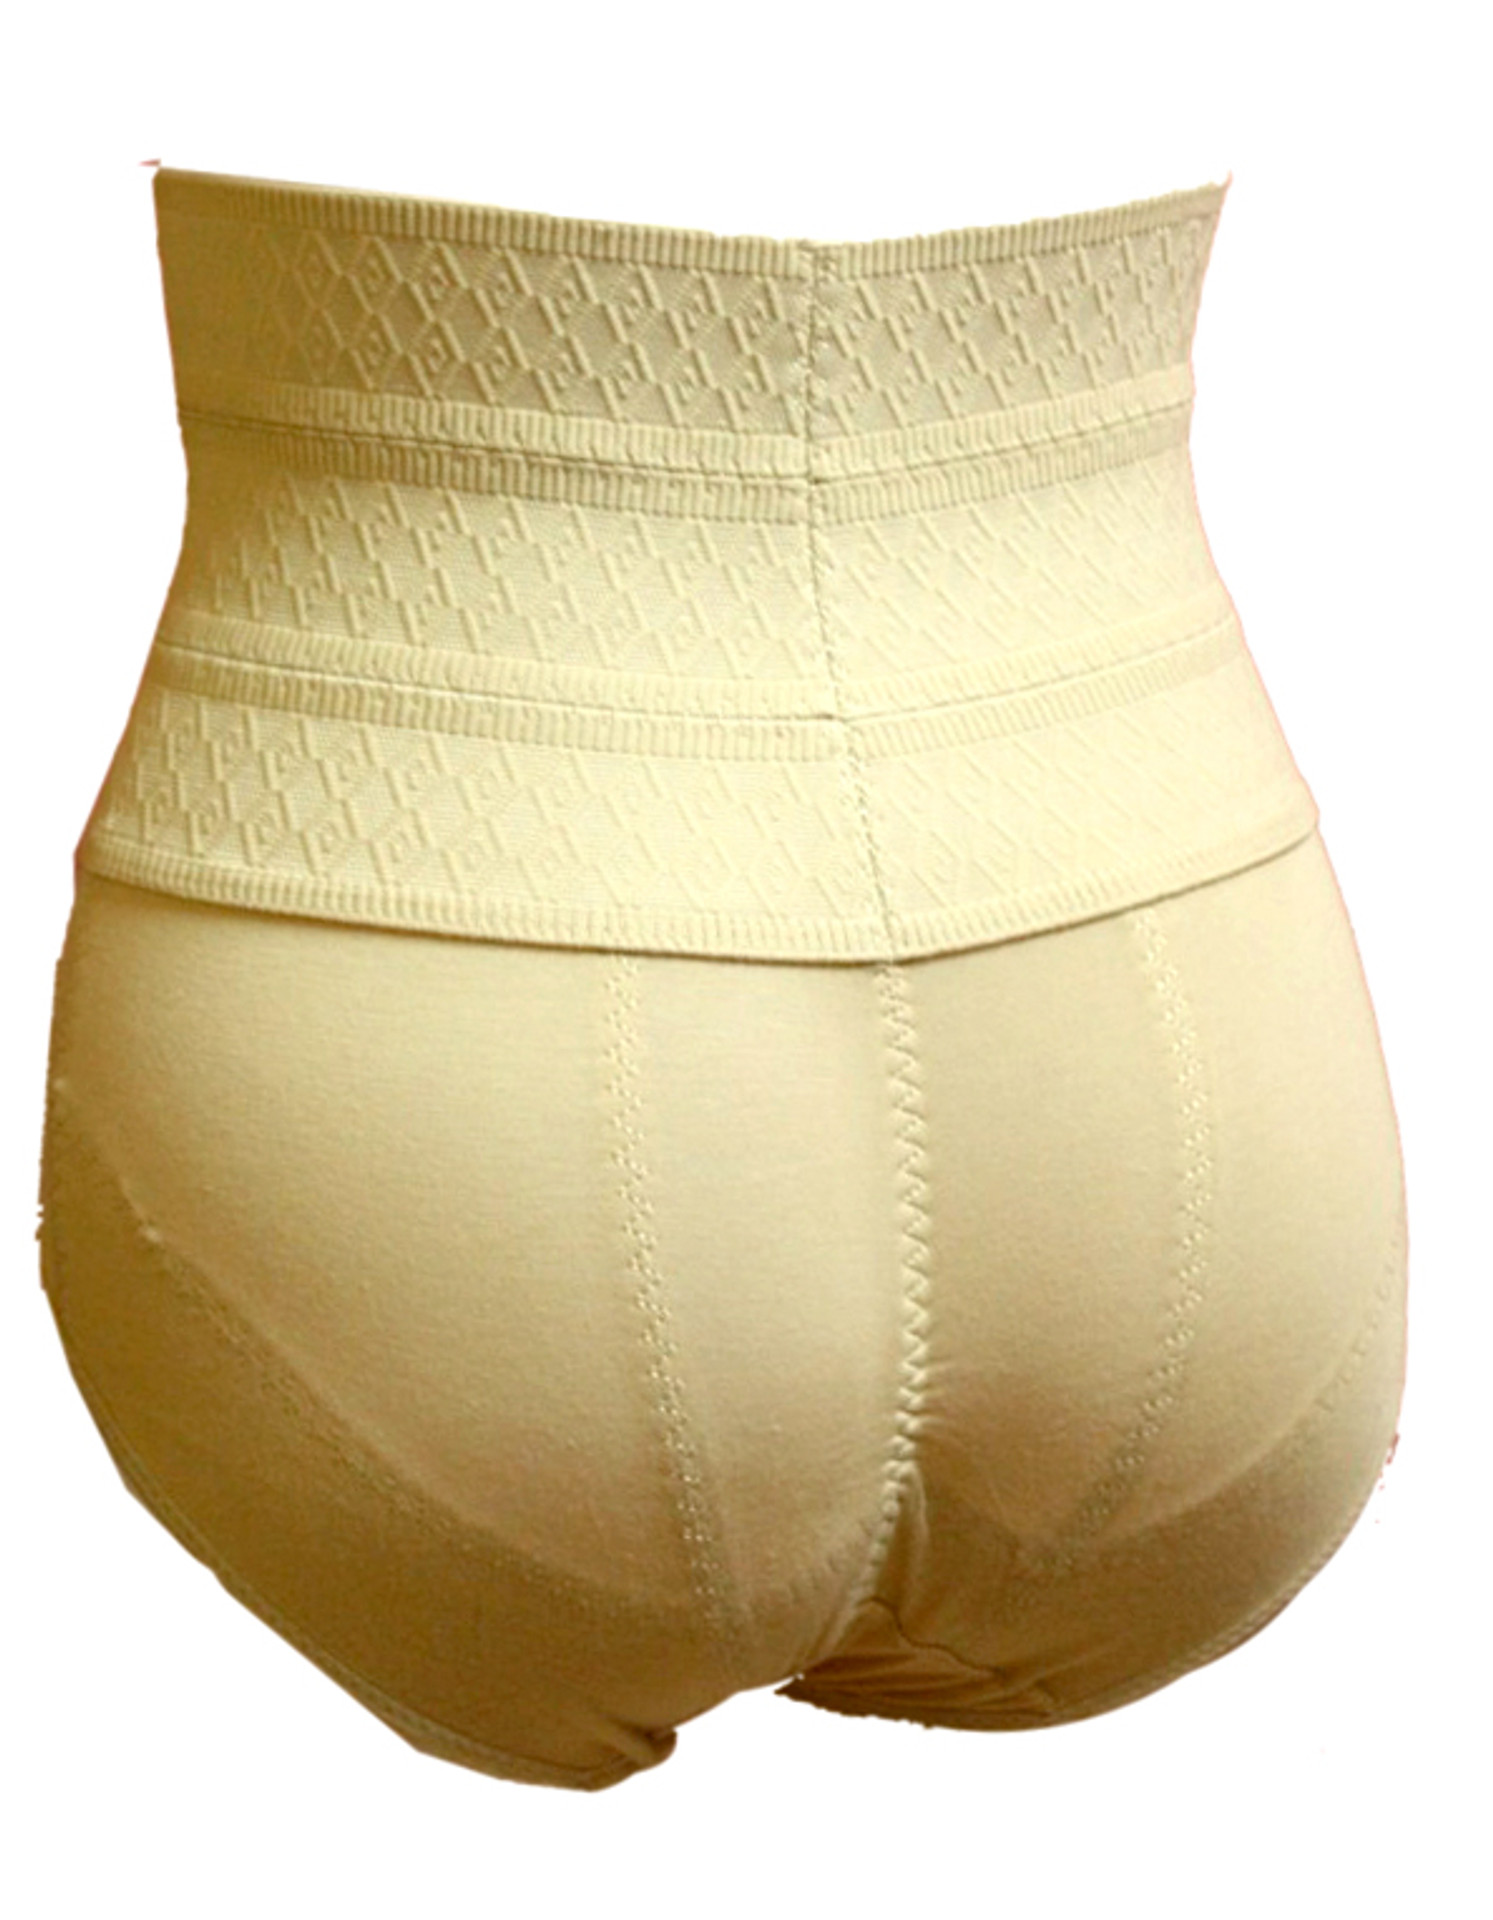 SOLID AND POCKET GIRDLE PANTY-69083 (12pc)